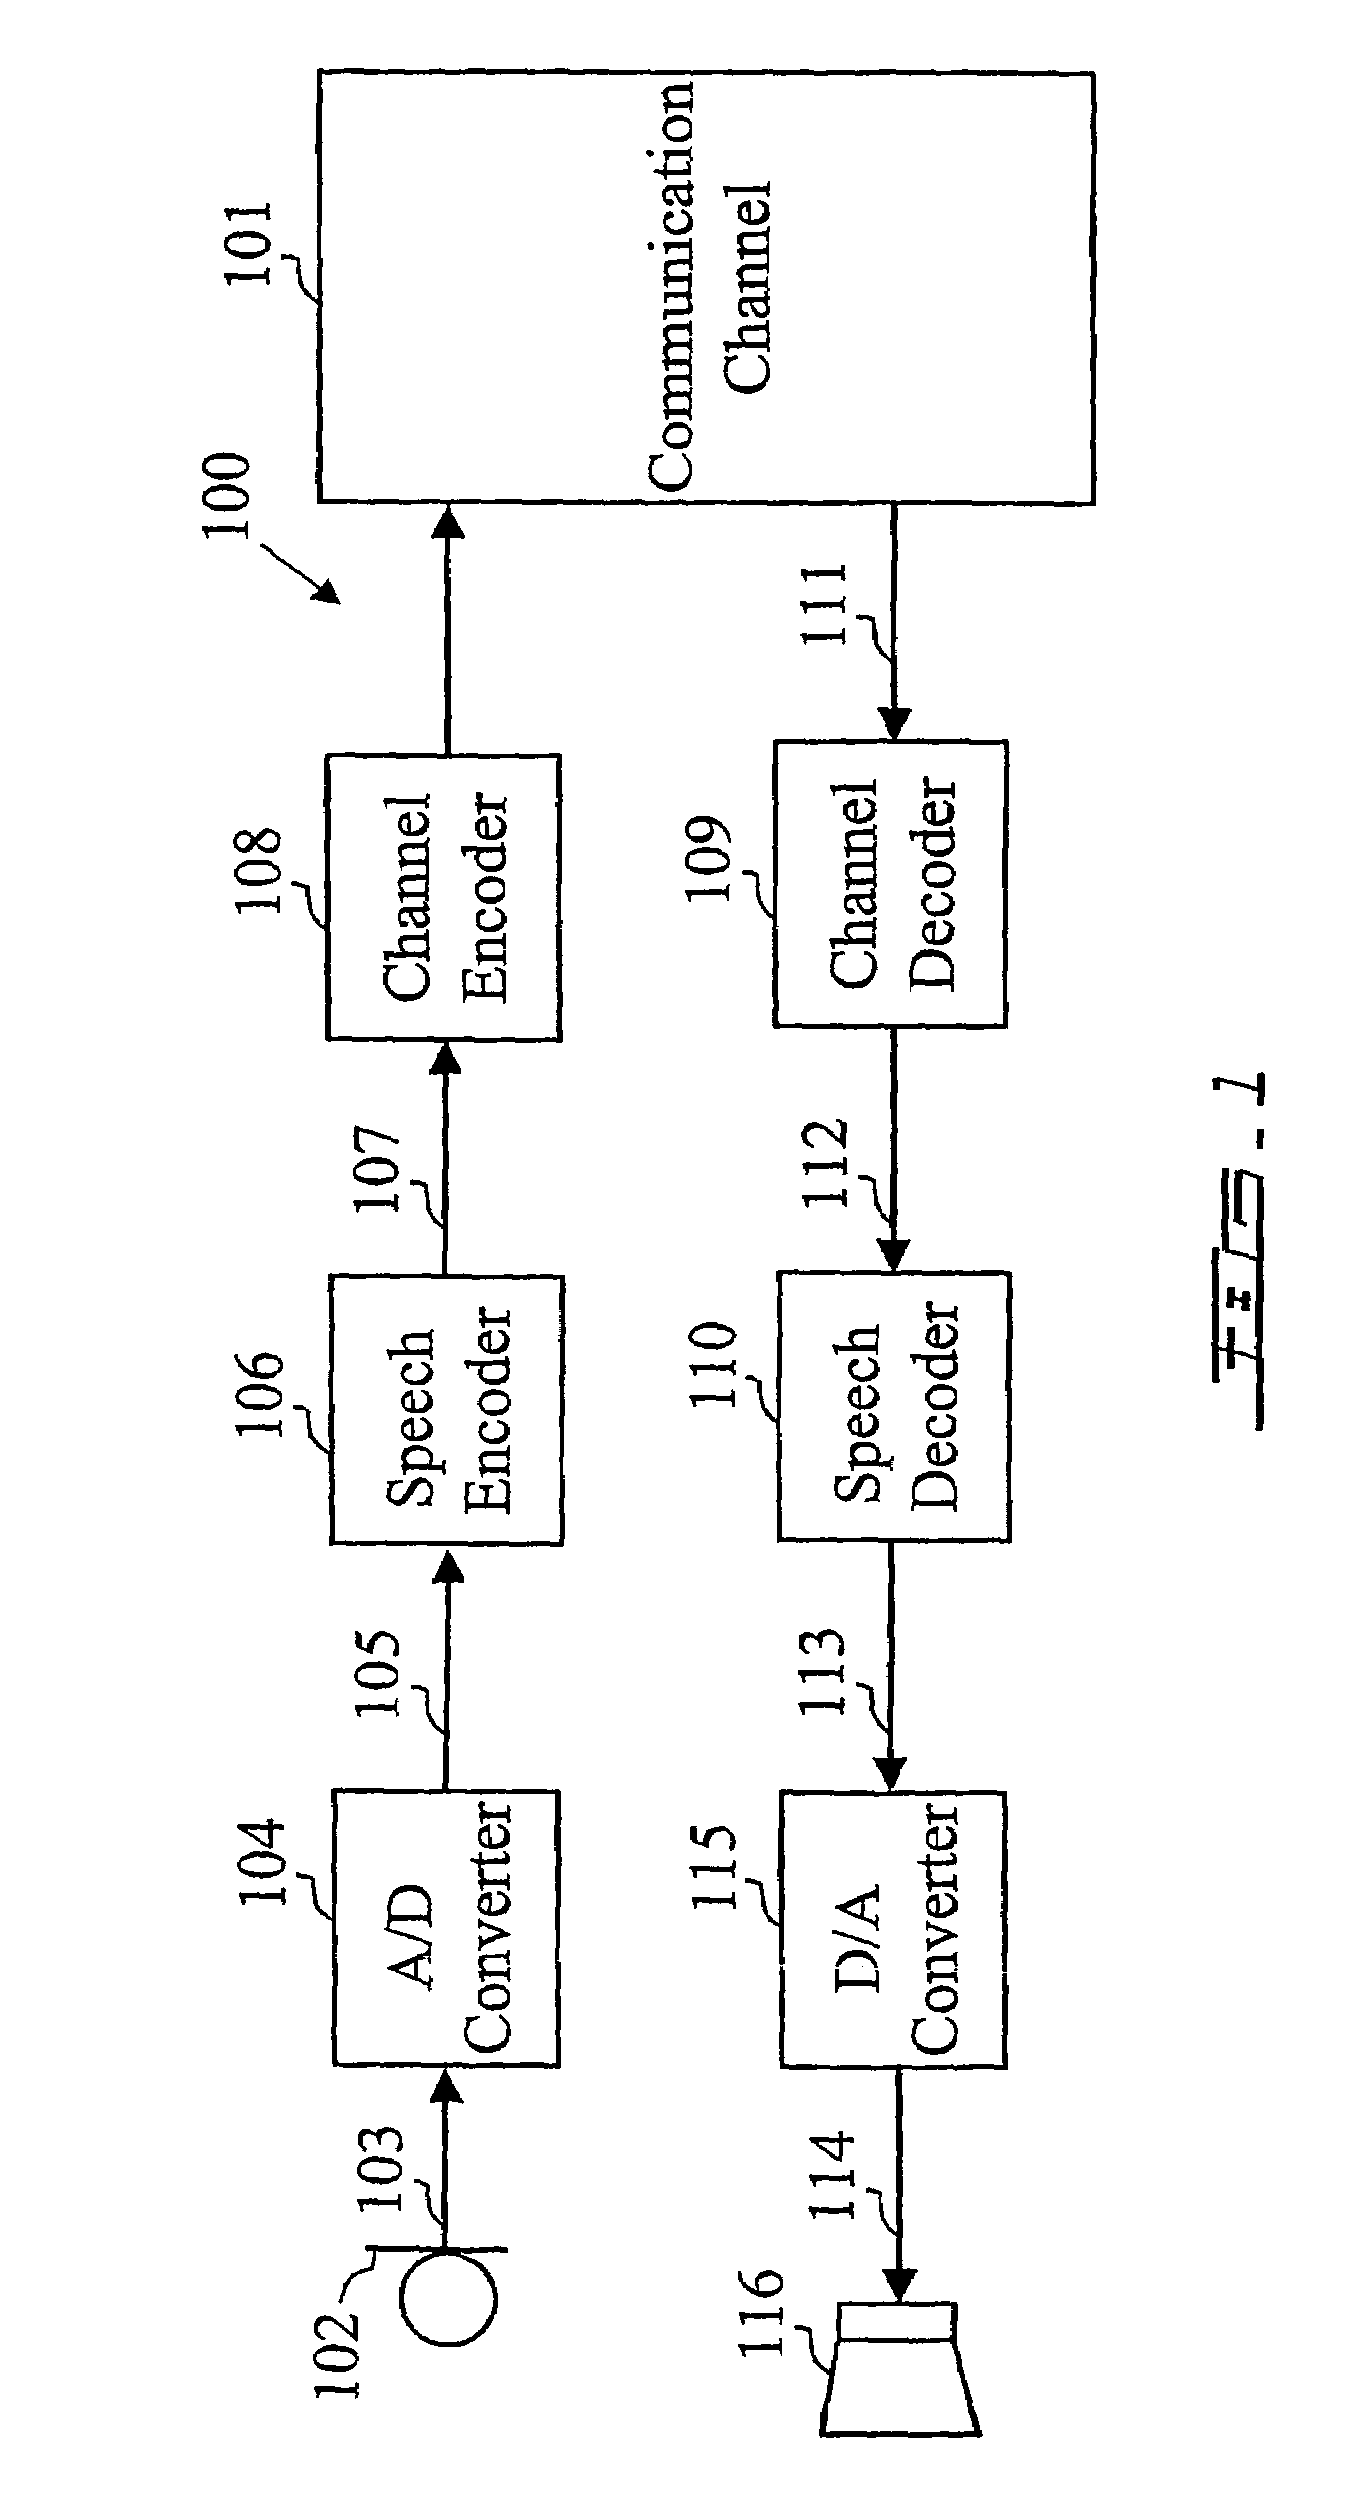 Method and device for efficient frame erasure concealment in linear predictive based speech codecs